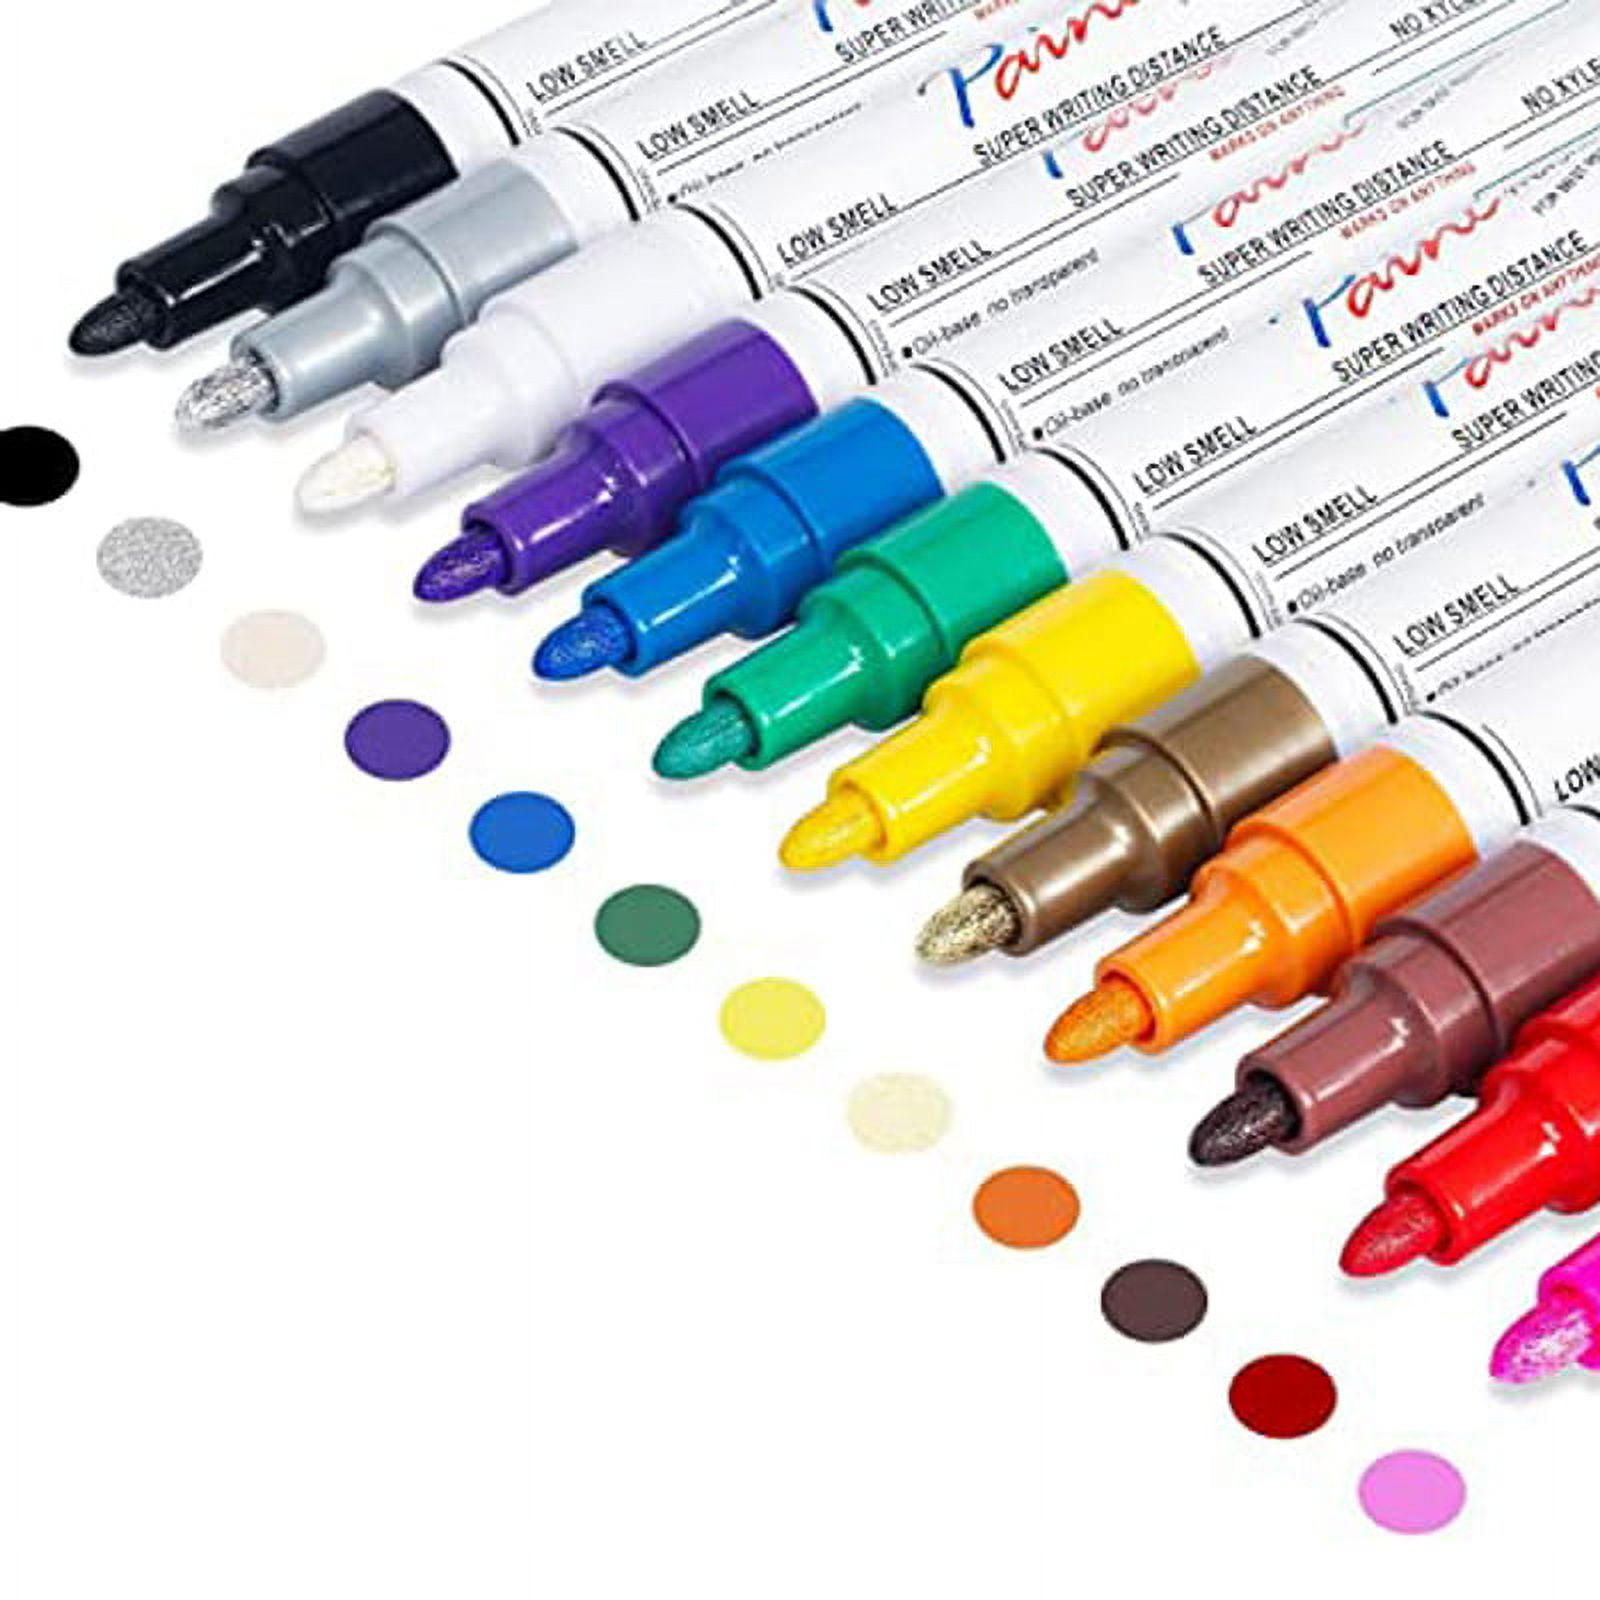 Nicecho Oil-Based Paint Pens, 12 Colors Permanent Paint Markers Medium Tip  Never Fade Quick Drying and Waterproof Marker Set for Metal, Wood, Fabric